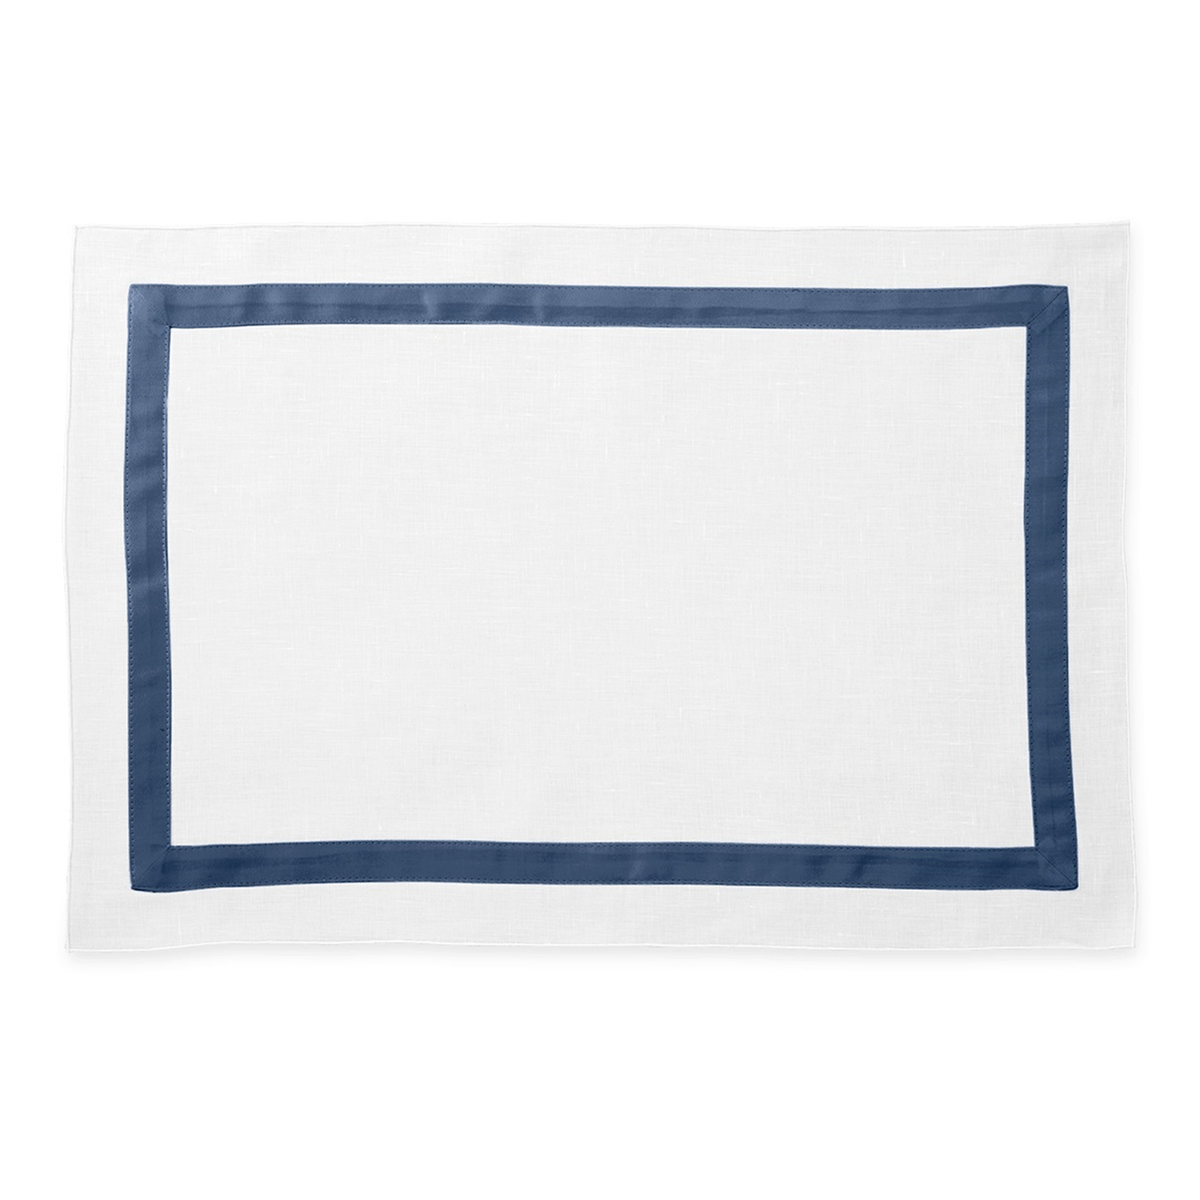 Placemat of Matouk Schumacher Lowell Table Linens in Color Steel Blue